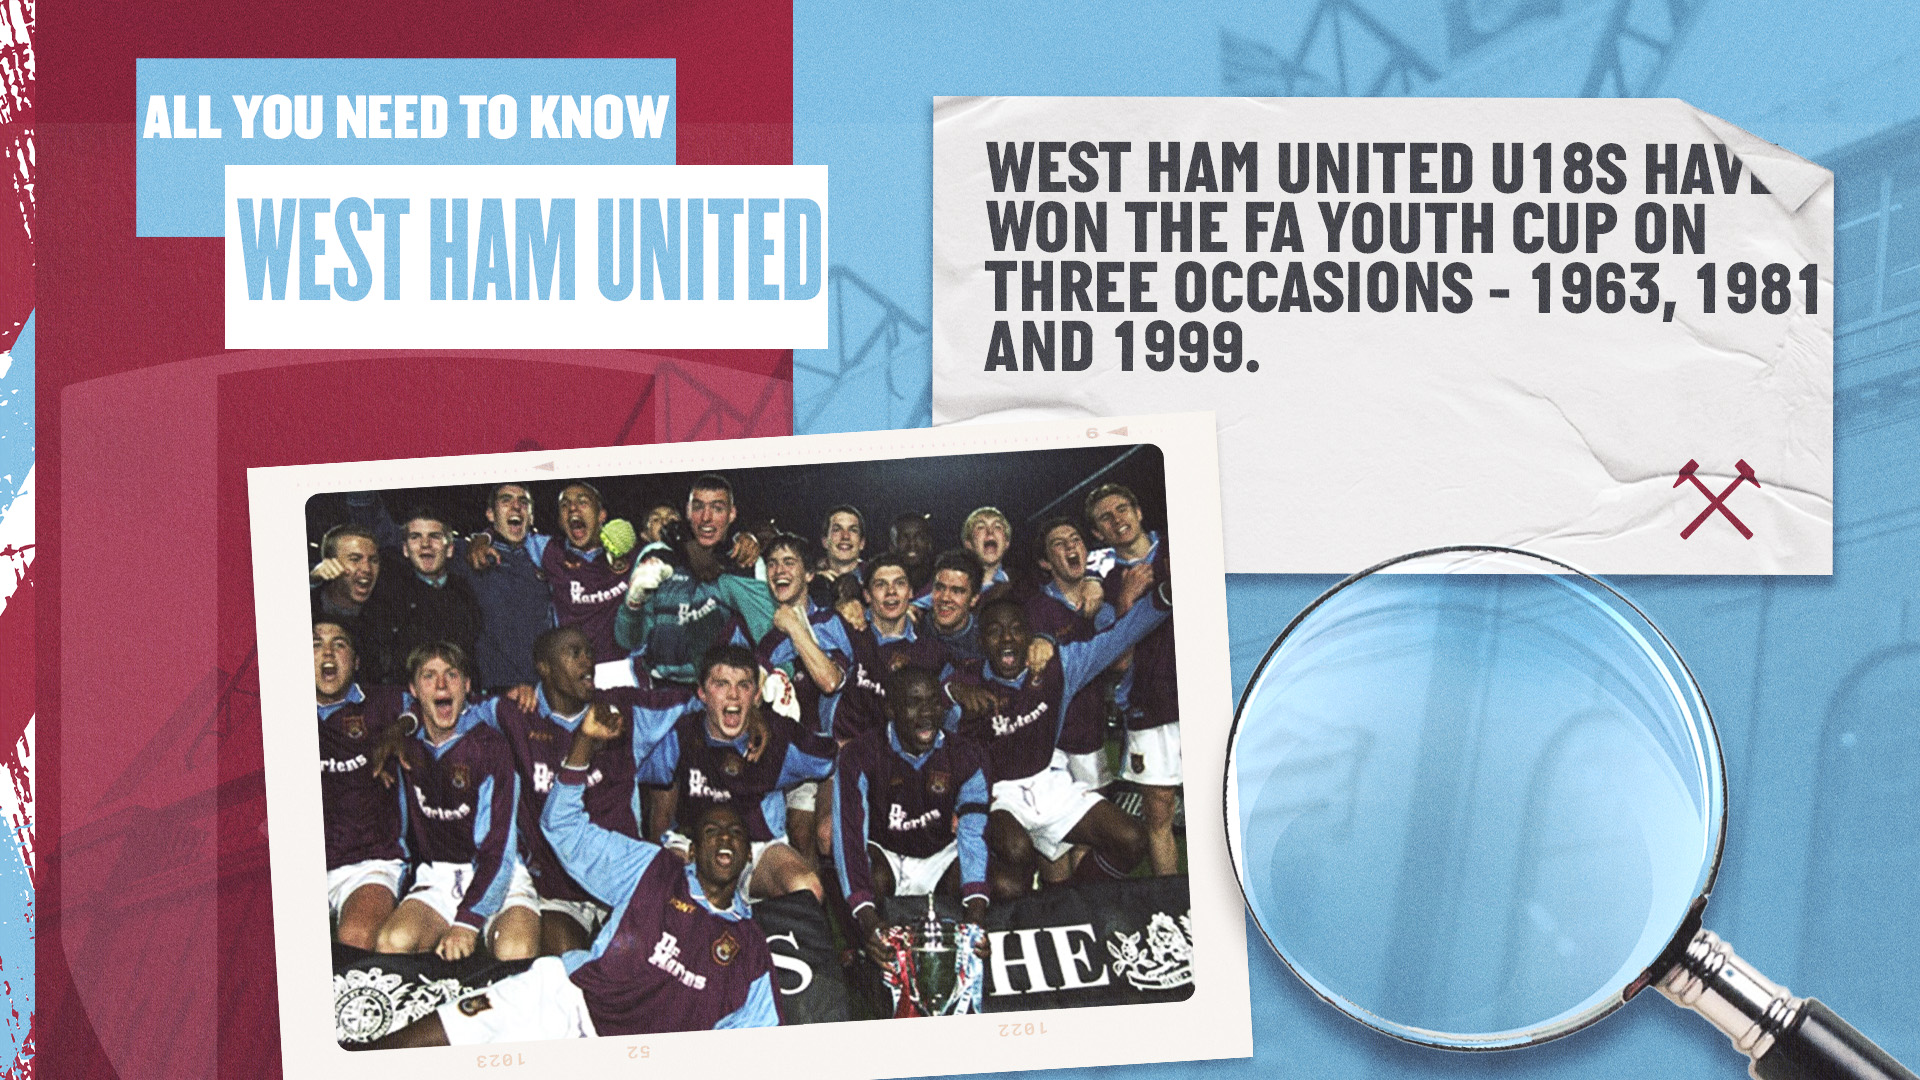 FA YOUTH CUP - West Ham United